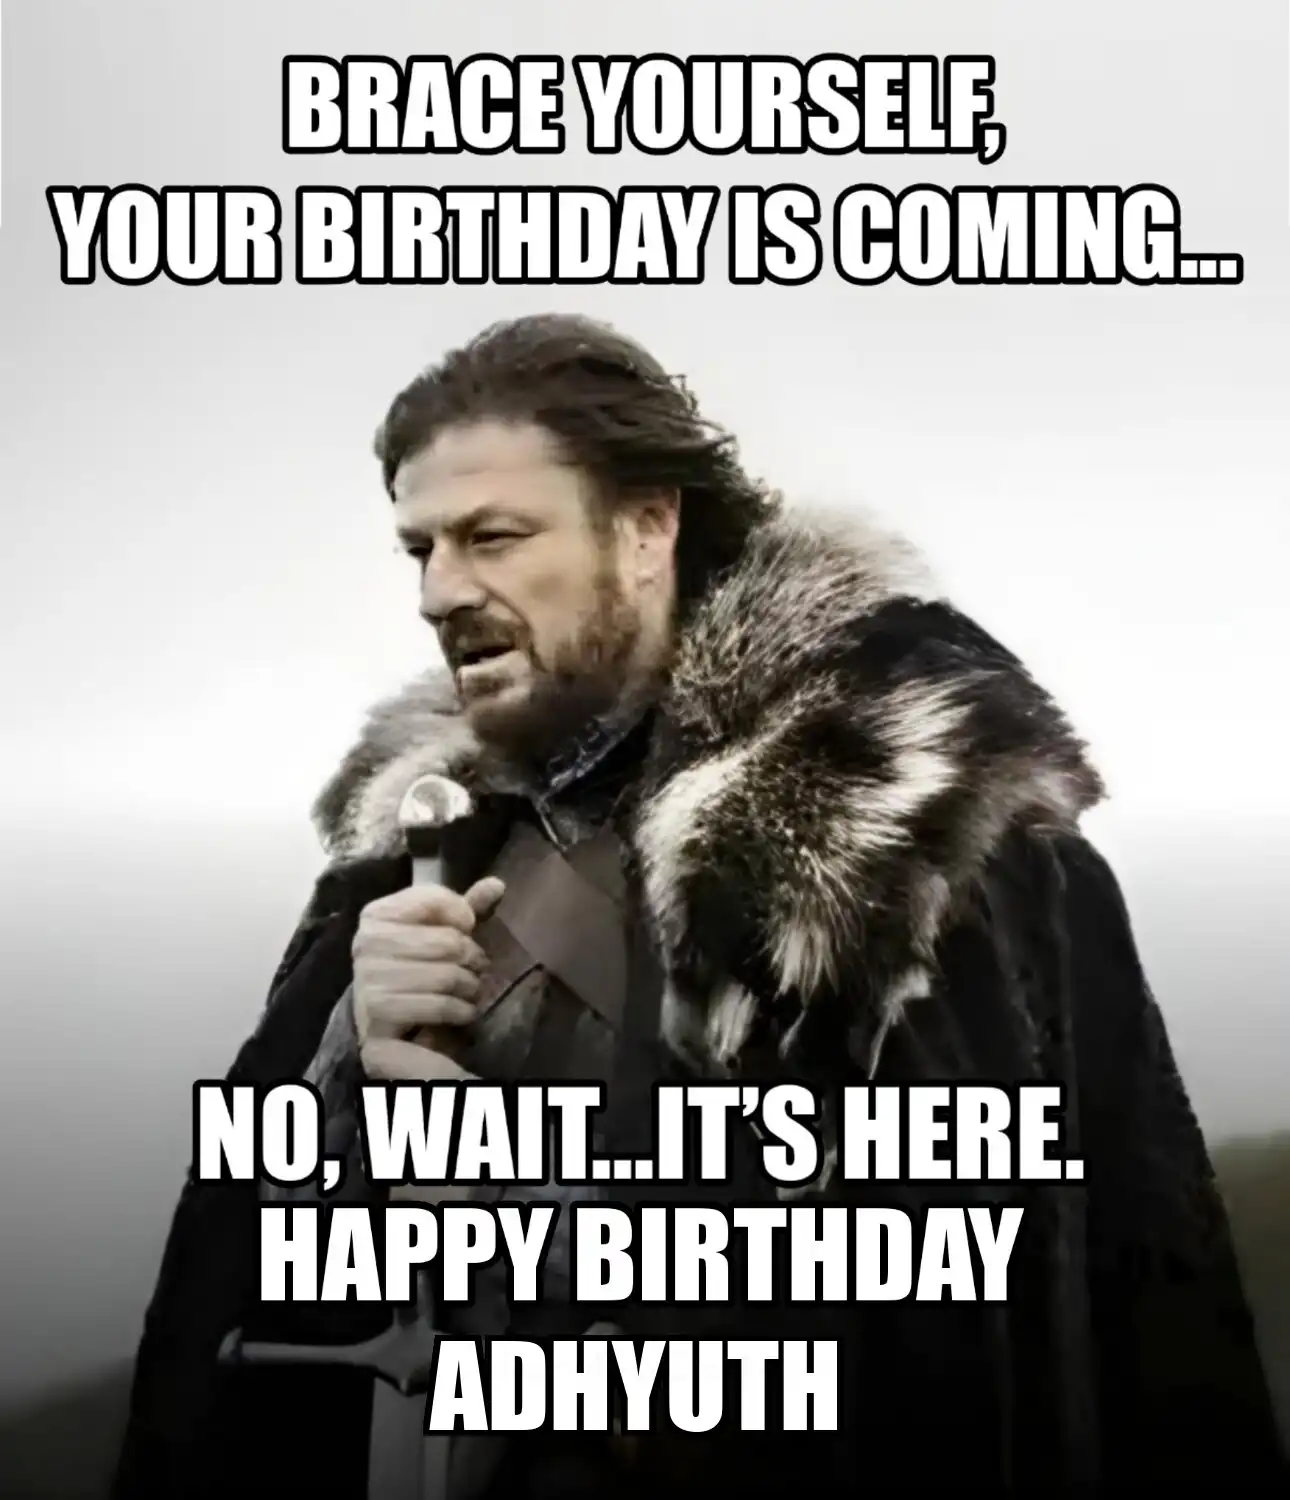 Happy Birthday Adhyuth Brace Yourself Your Birthday Is Coming Meme